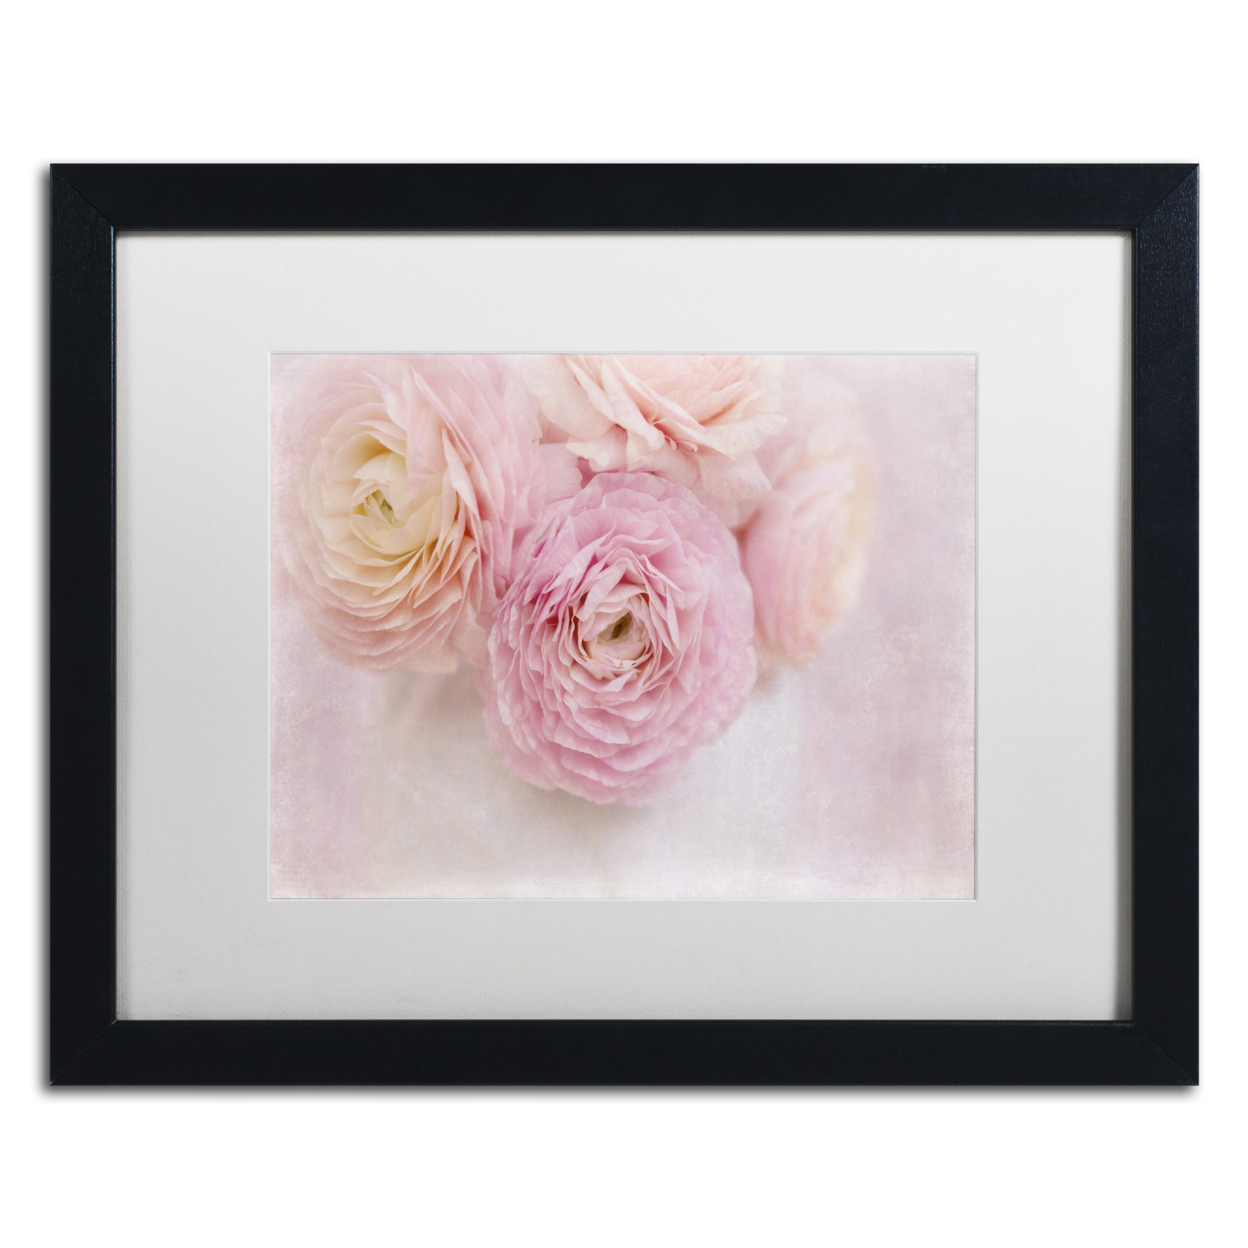 Cora Niele 'Chique Bouquet' Black Wooden Framed Art 18 X 22 Inches